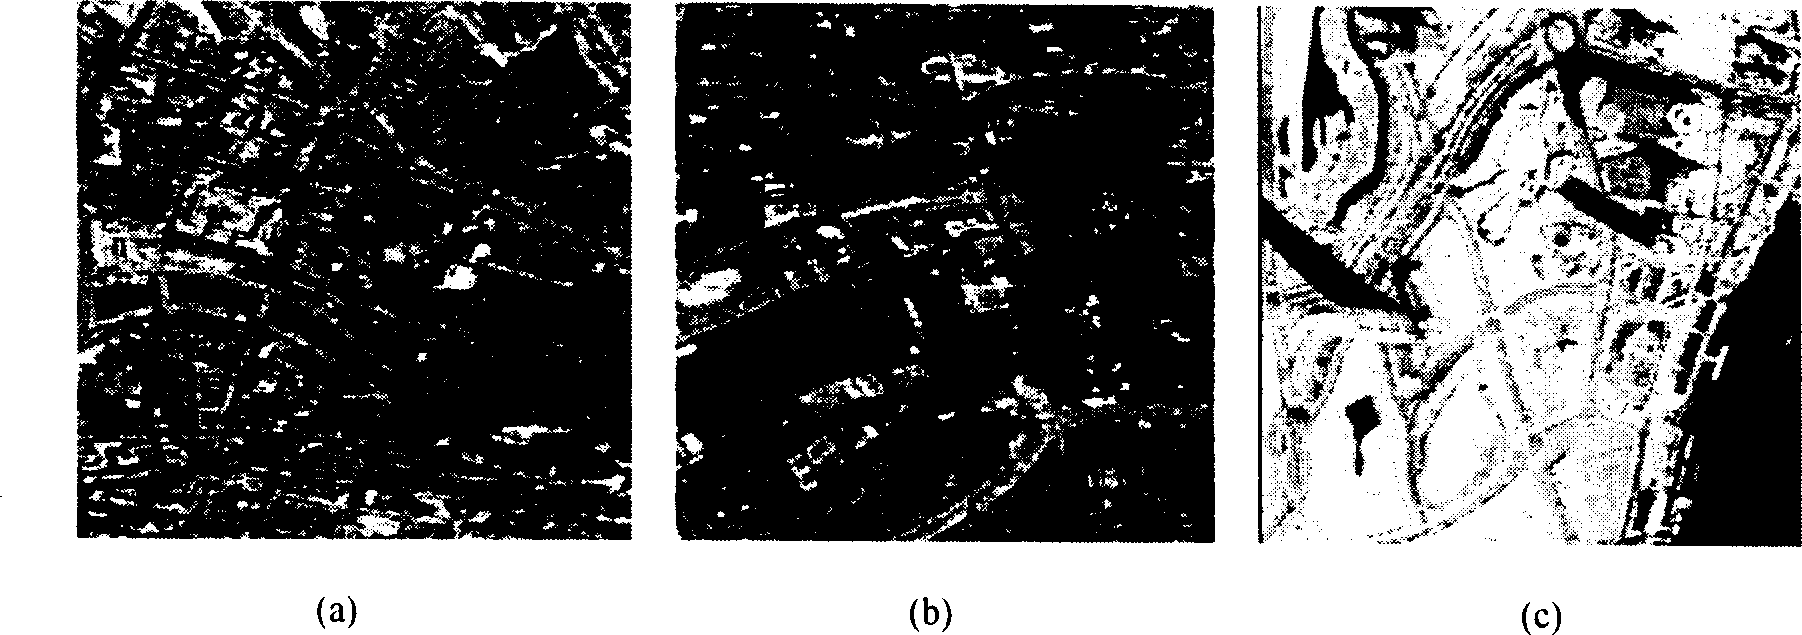 Method for picking up and comparing spectral features in remote images